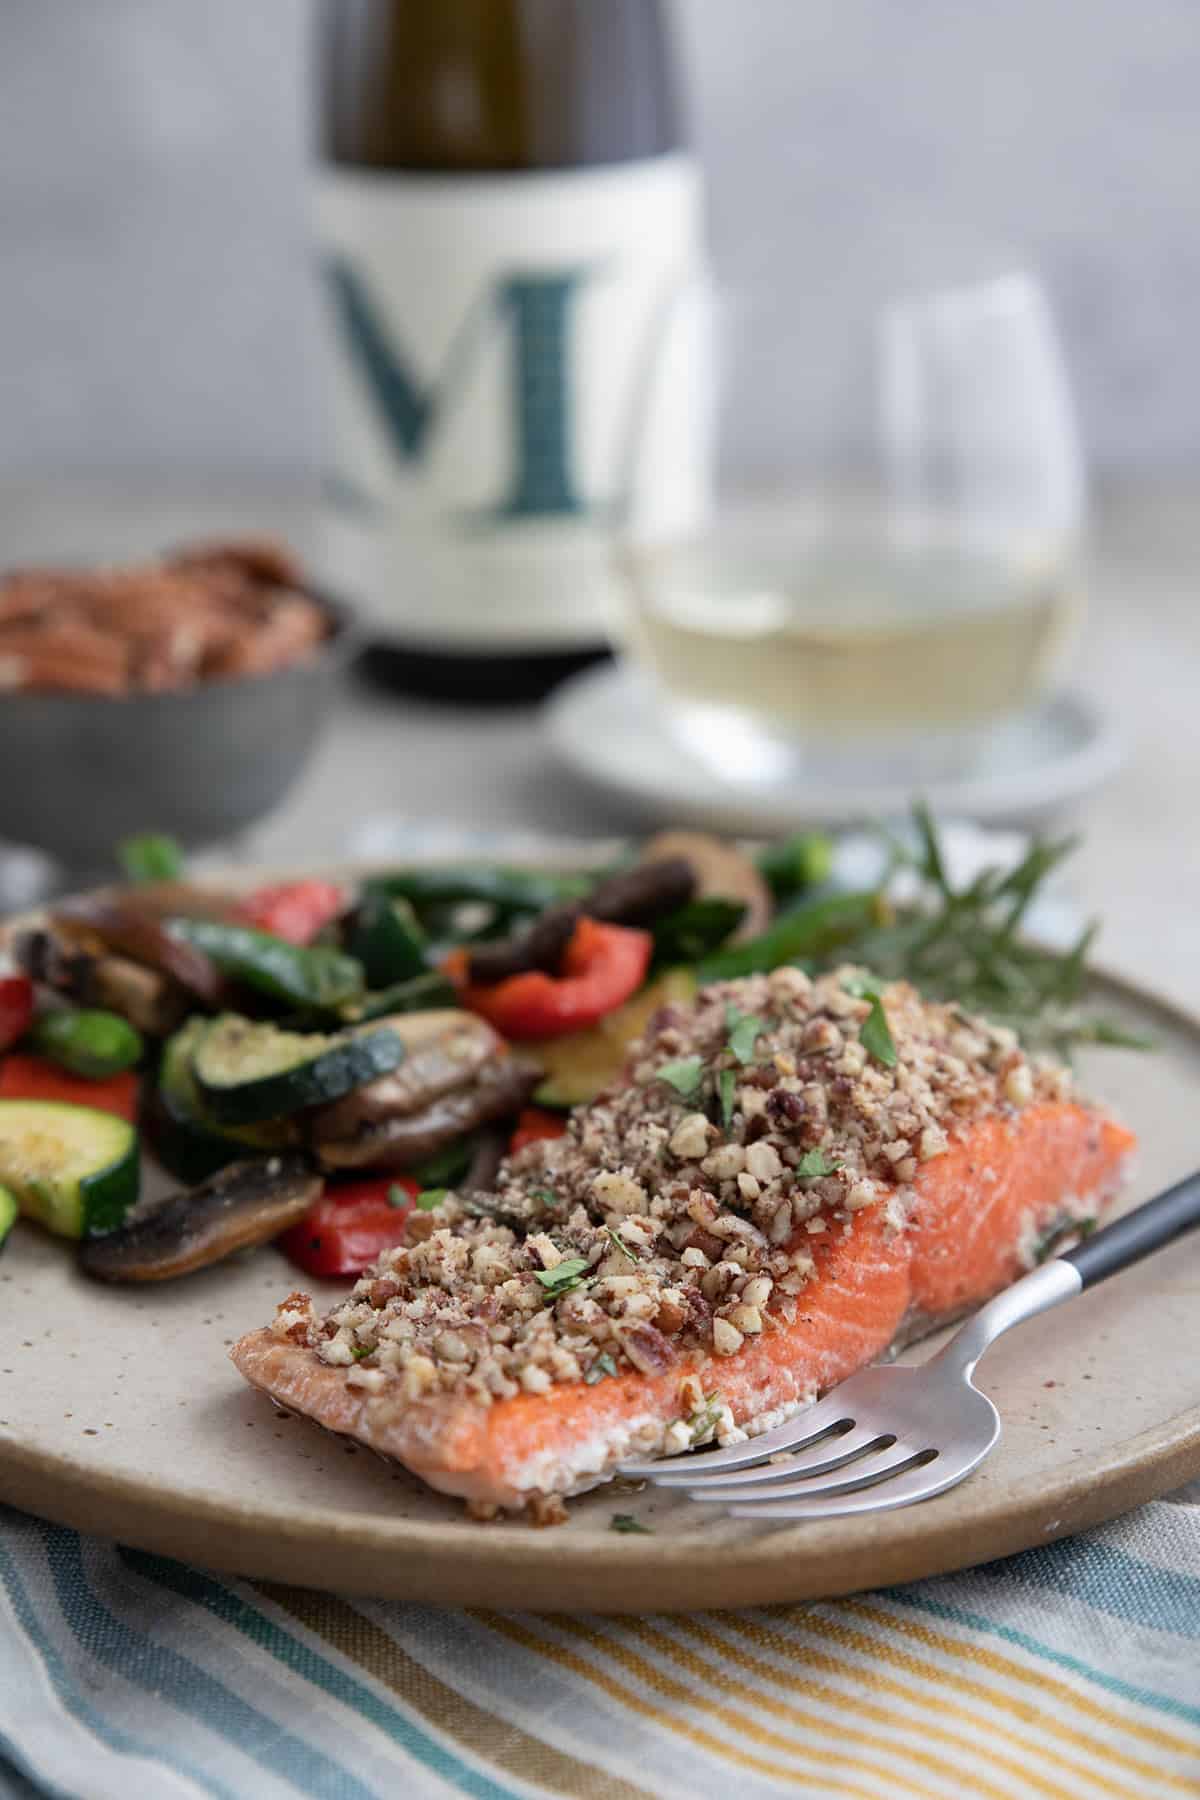 A piece of Pecan Crusted salmon on a rustic plate with a glass of wine in the background.